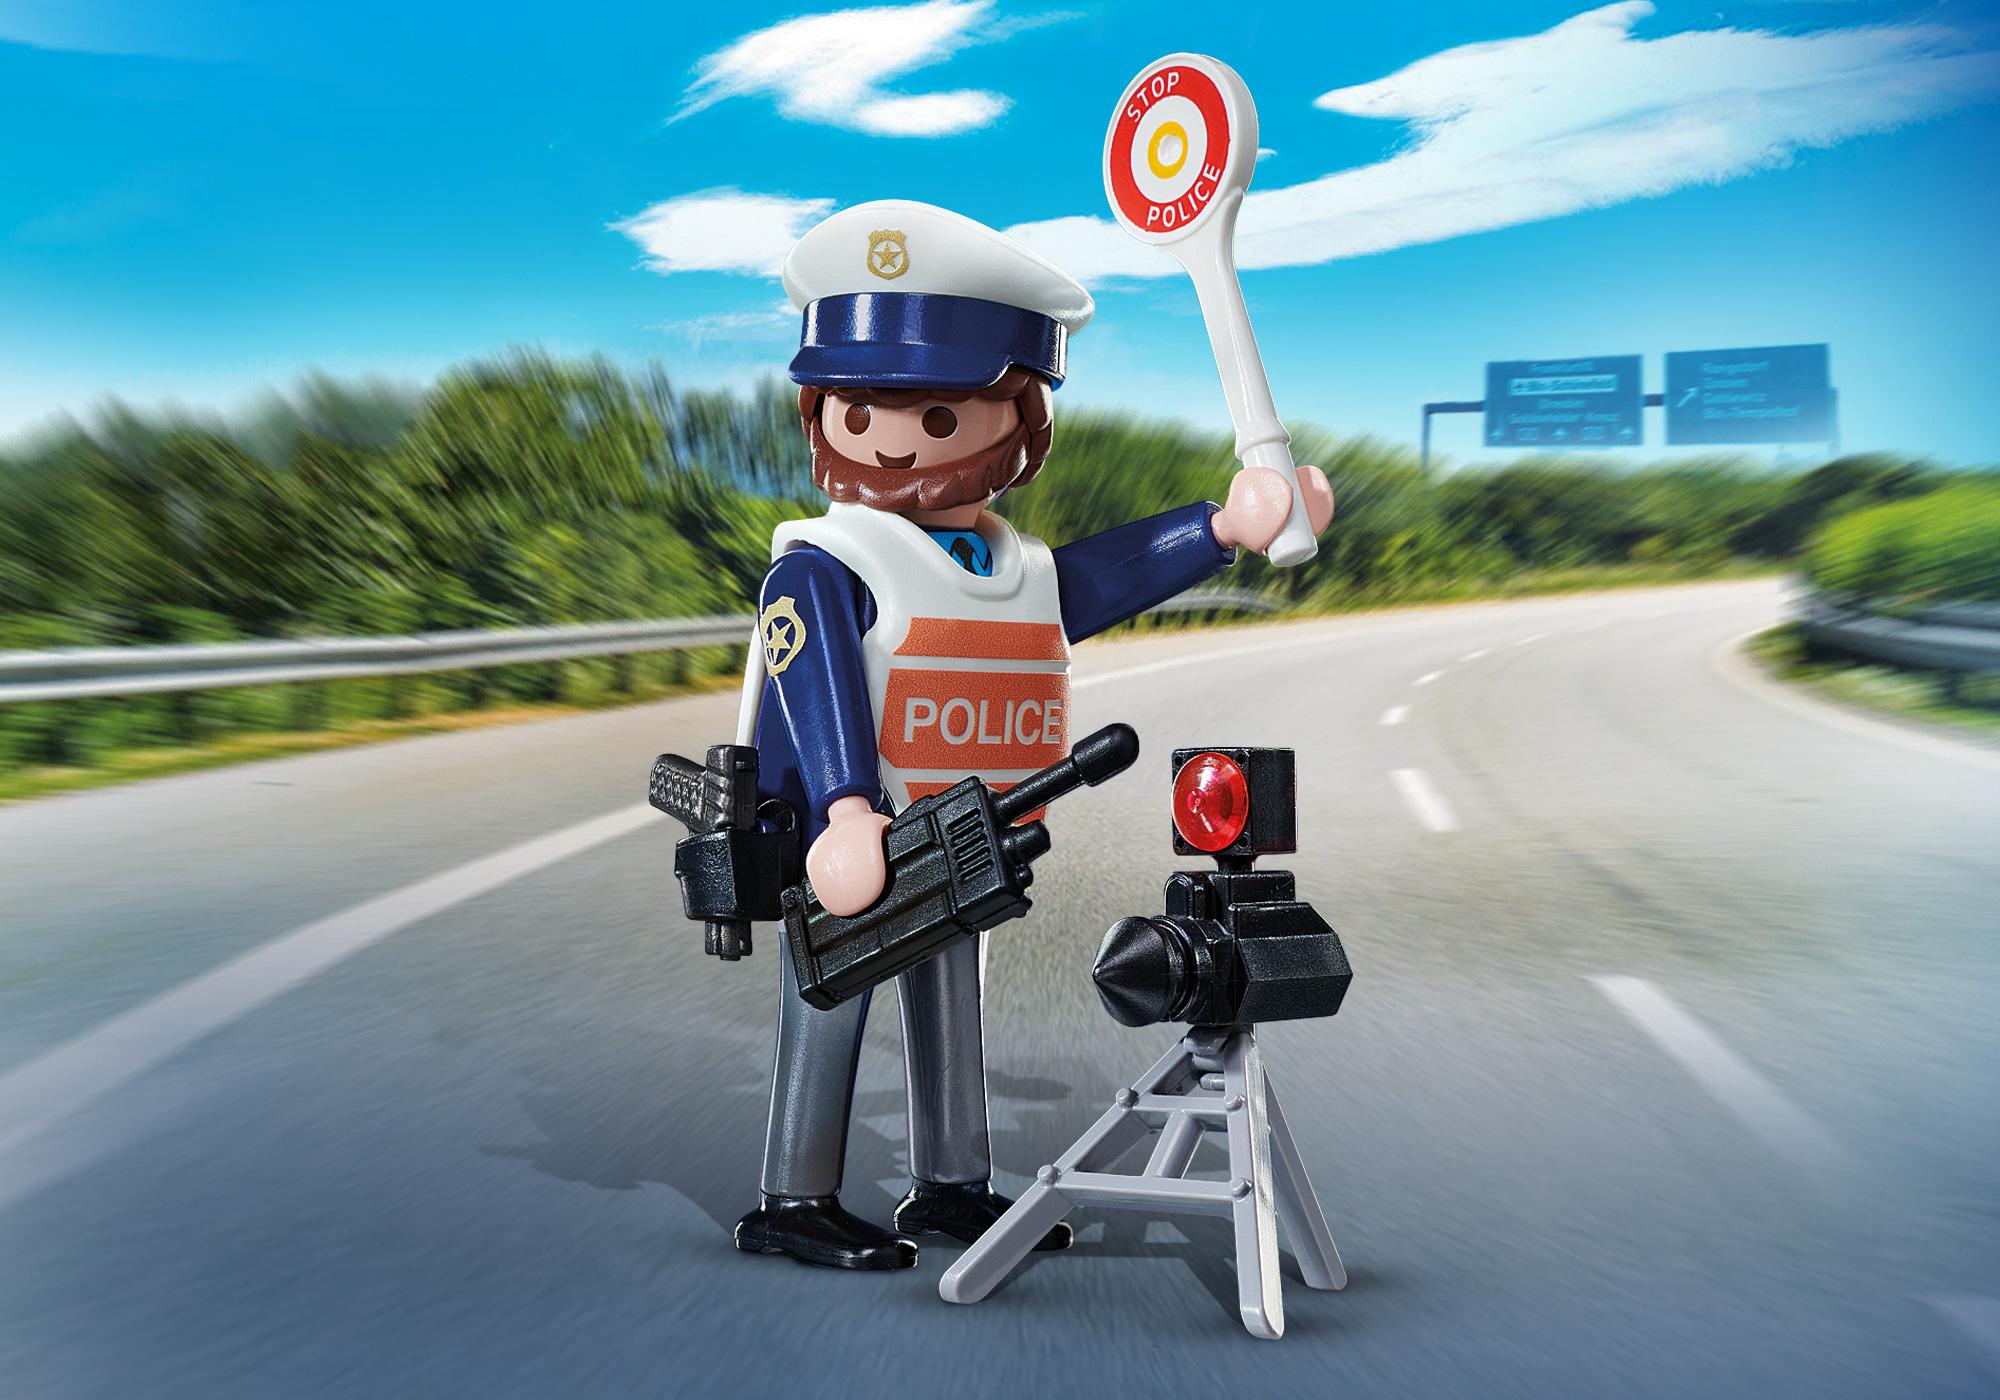 PLAYMOBIL FIGURE POLICE OFFICER POLICE OFFICERS TRAFFIC COMMISSION  STATION